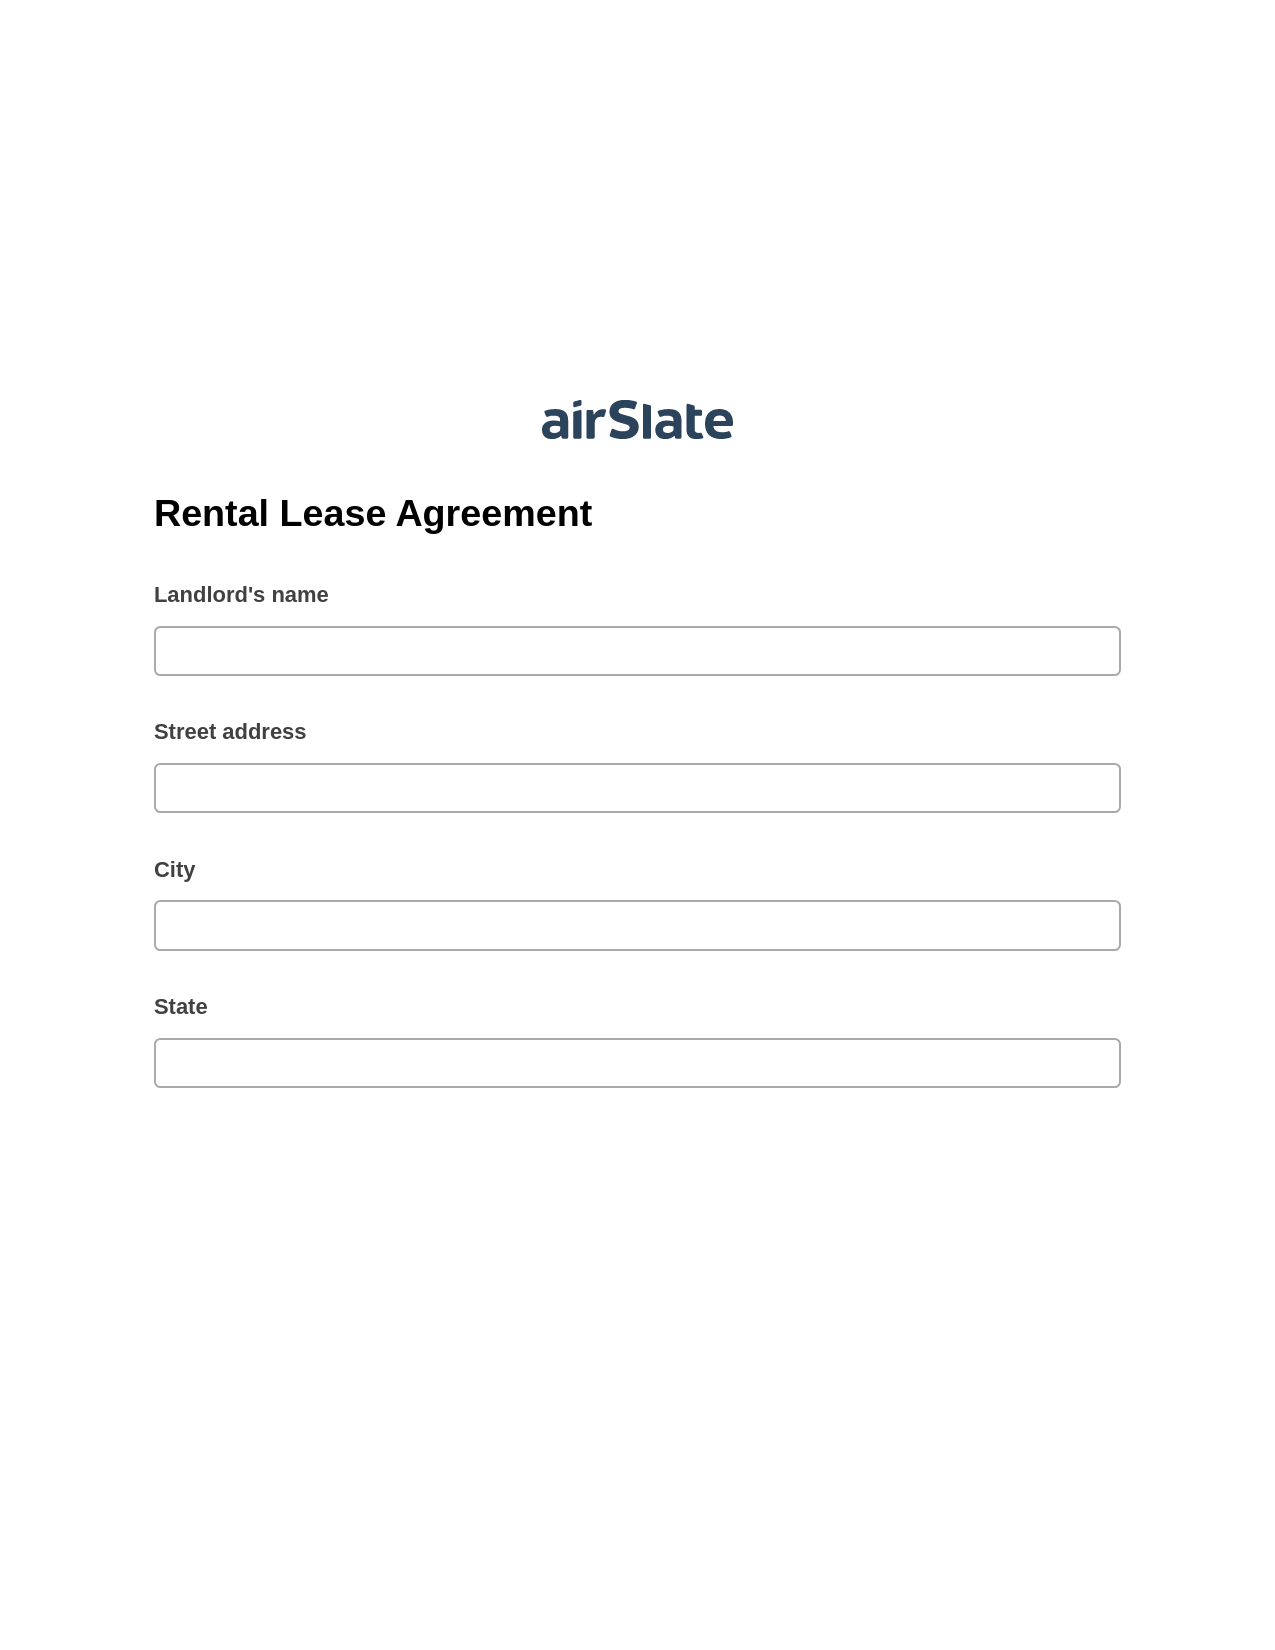 Rental Lease Agreement Pre-fill Slate from MS Dynamics 365 Records Bot, Google Cloud Print Bot, Export to NetSuite Record Bot